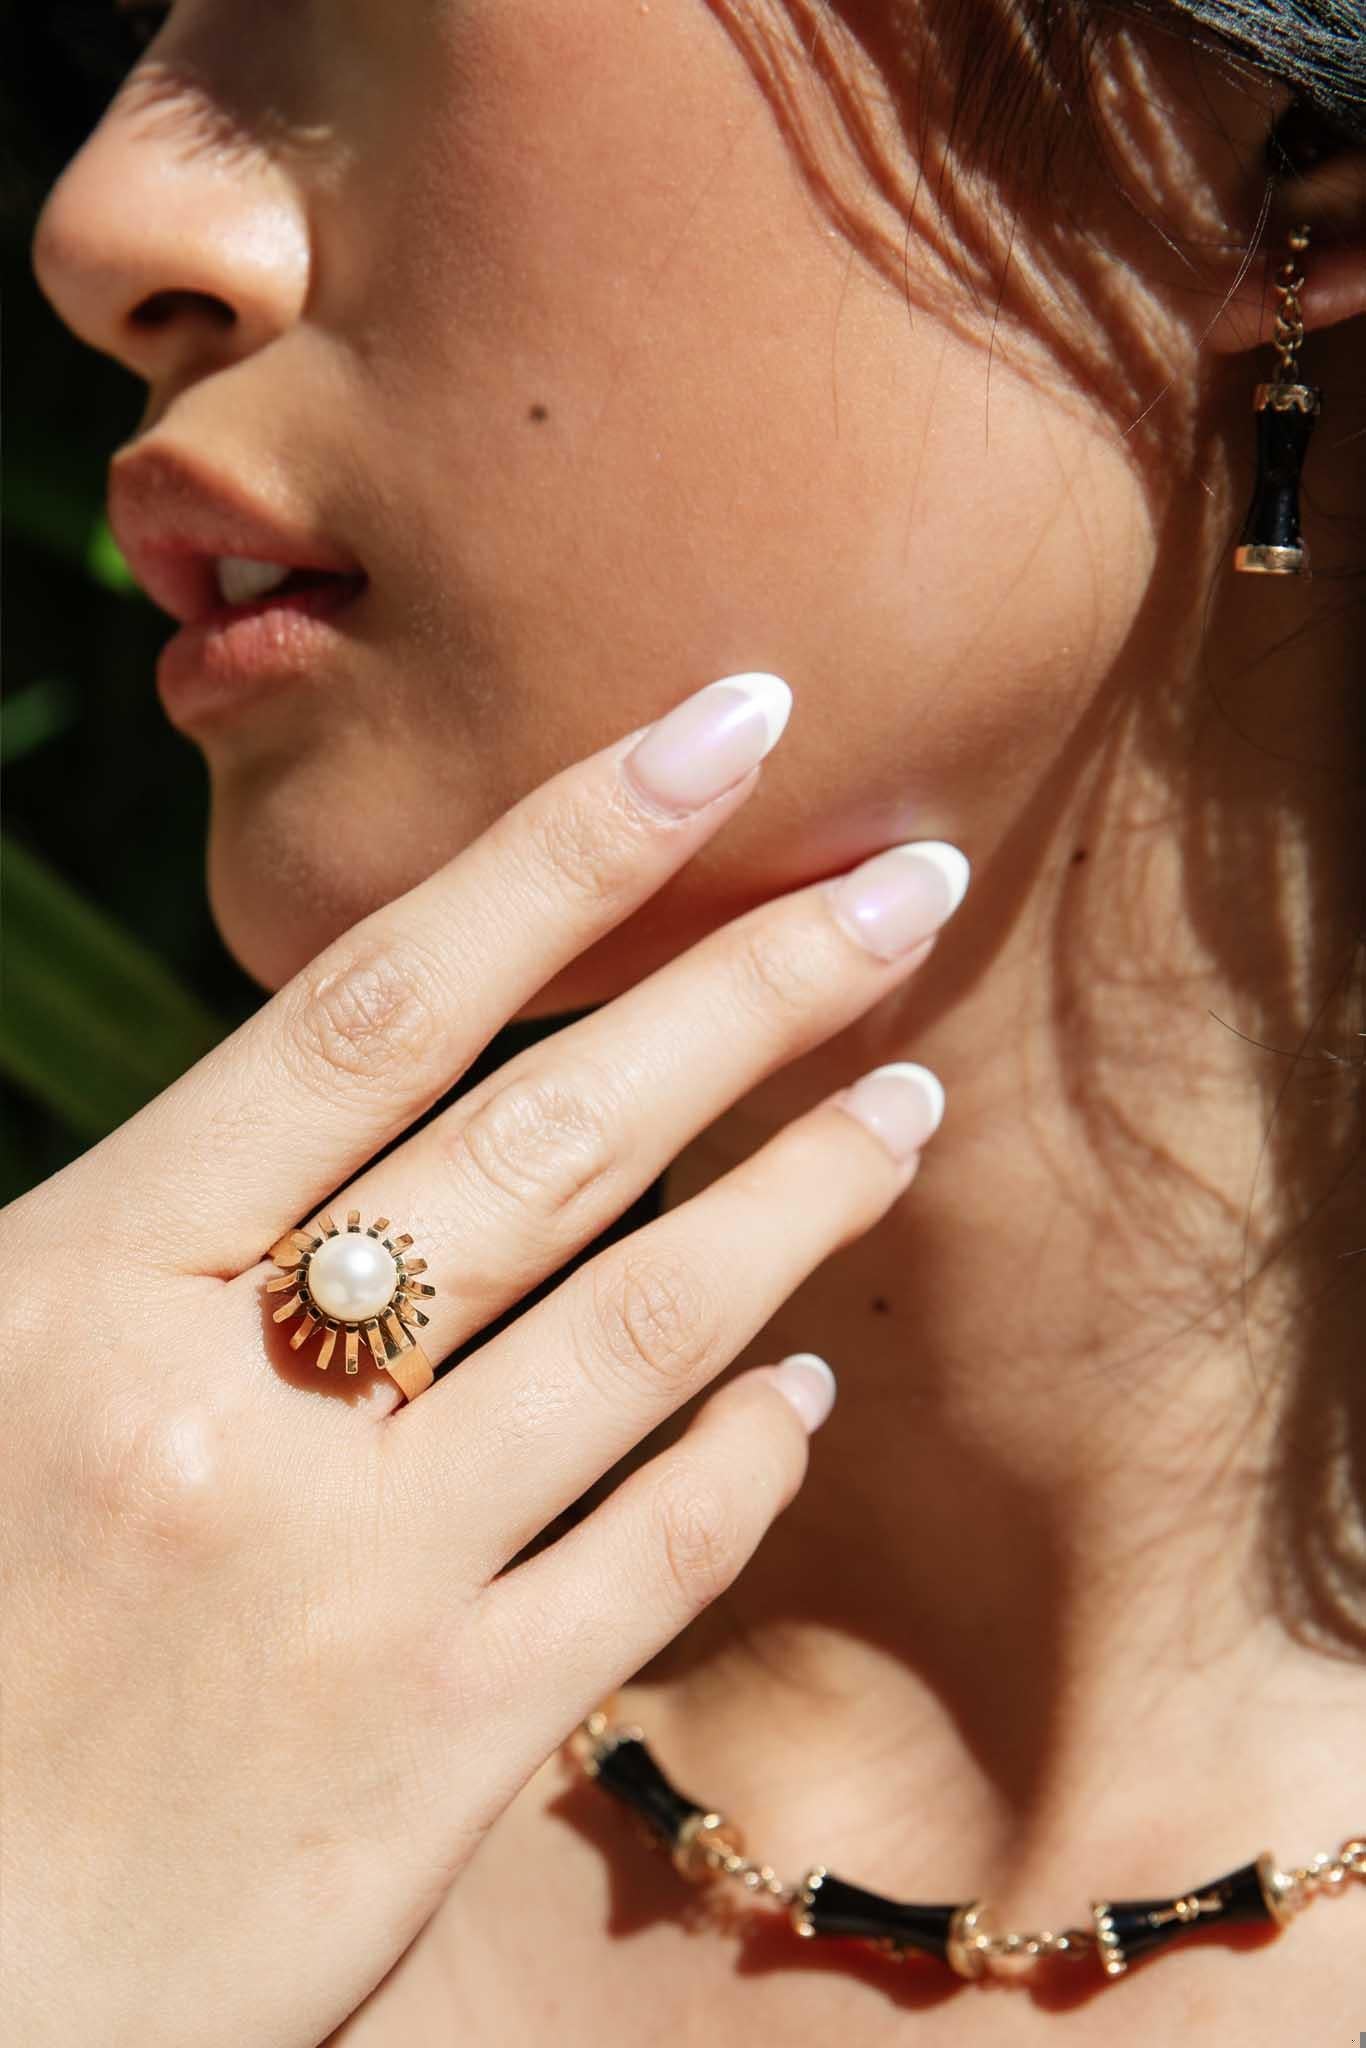 A lovely freshwater pearl exuding soft overtone hues of green and pink rests atop The Amelie Ring in an elegant chandelier-style setting. As unique as the one who wears her, she is sure to become a beloved favourite.

The Amelie Ring Gem Details
The